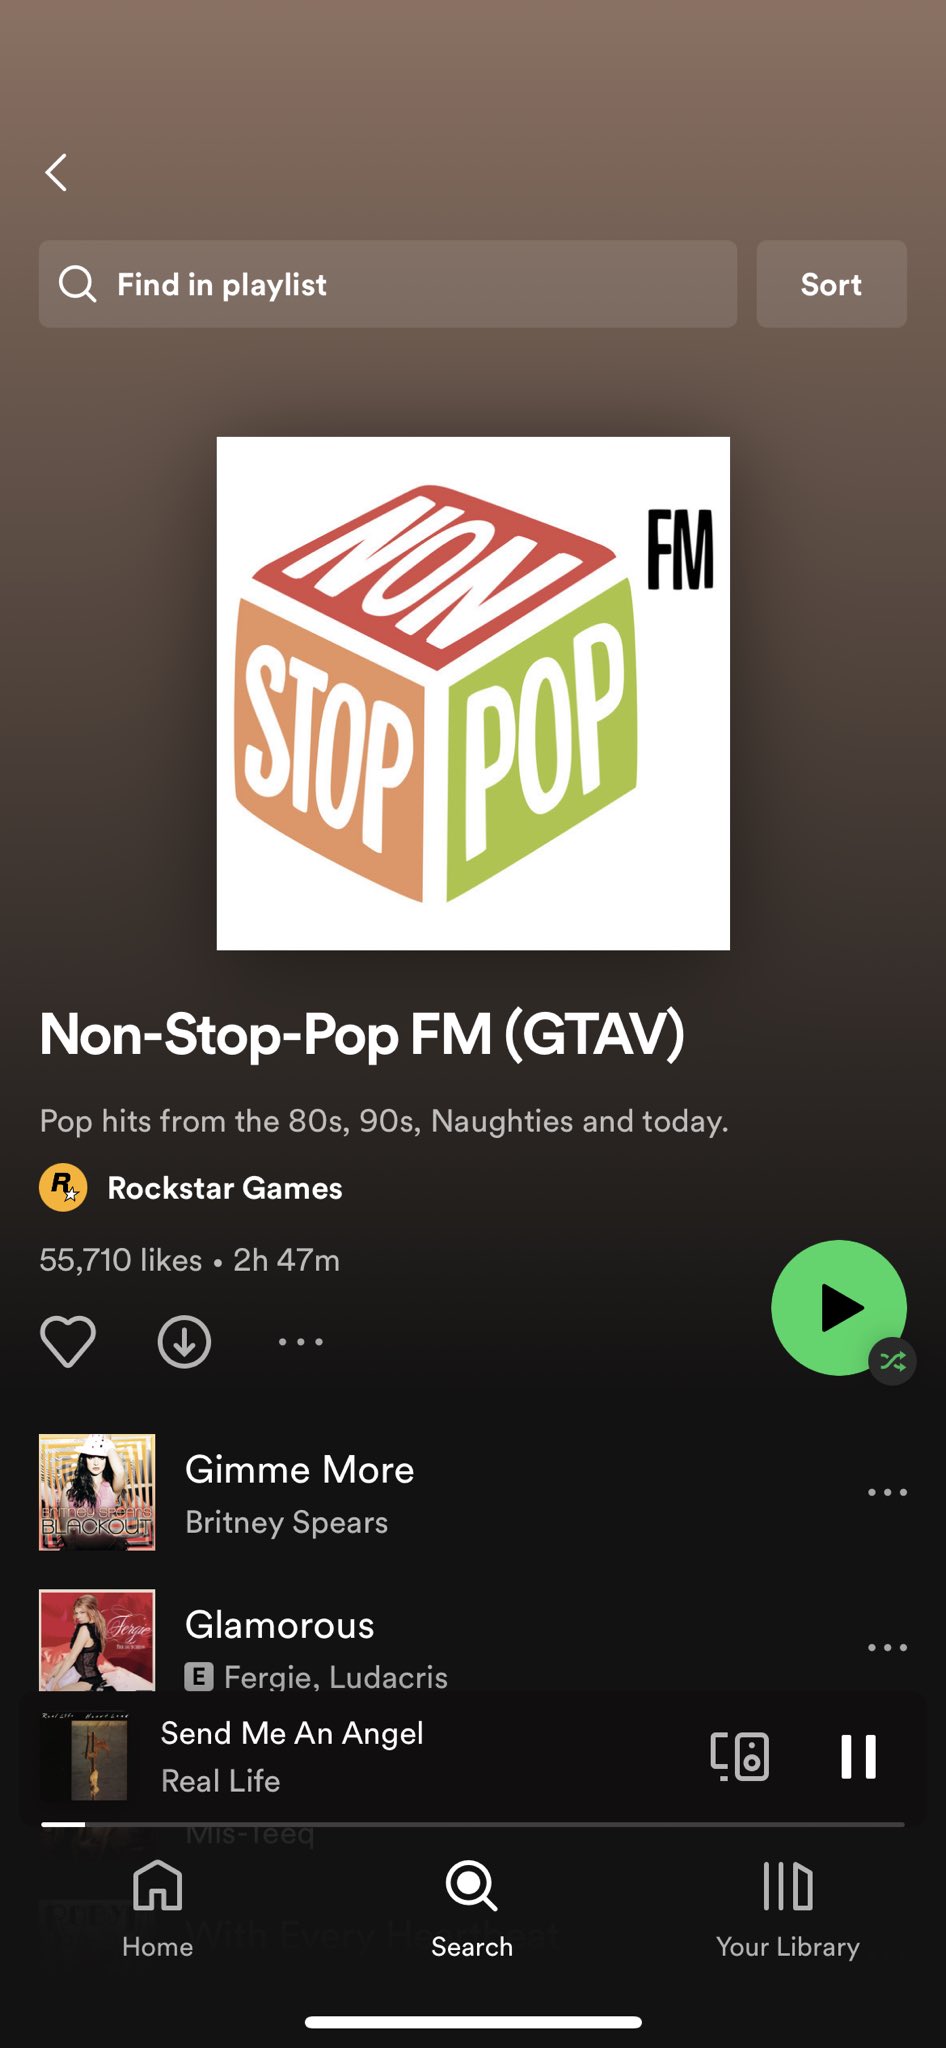 strawrii on Twitter: can't believe I didn't think of listening to gta 5 non-stop-pop radio on Spotify omfg!! https://t.co/g59oW2mFB2" / Twitter